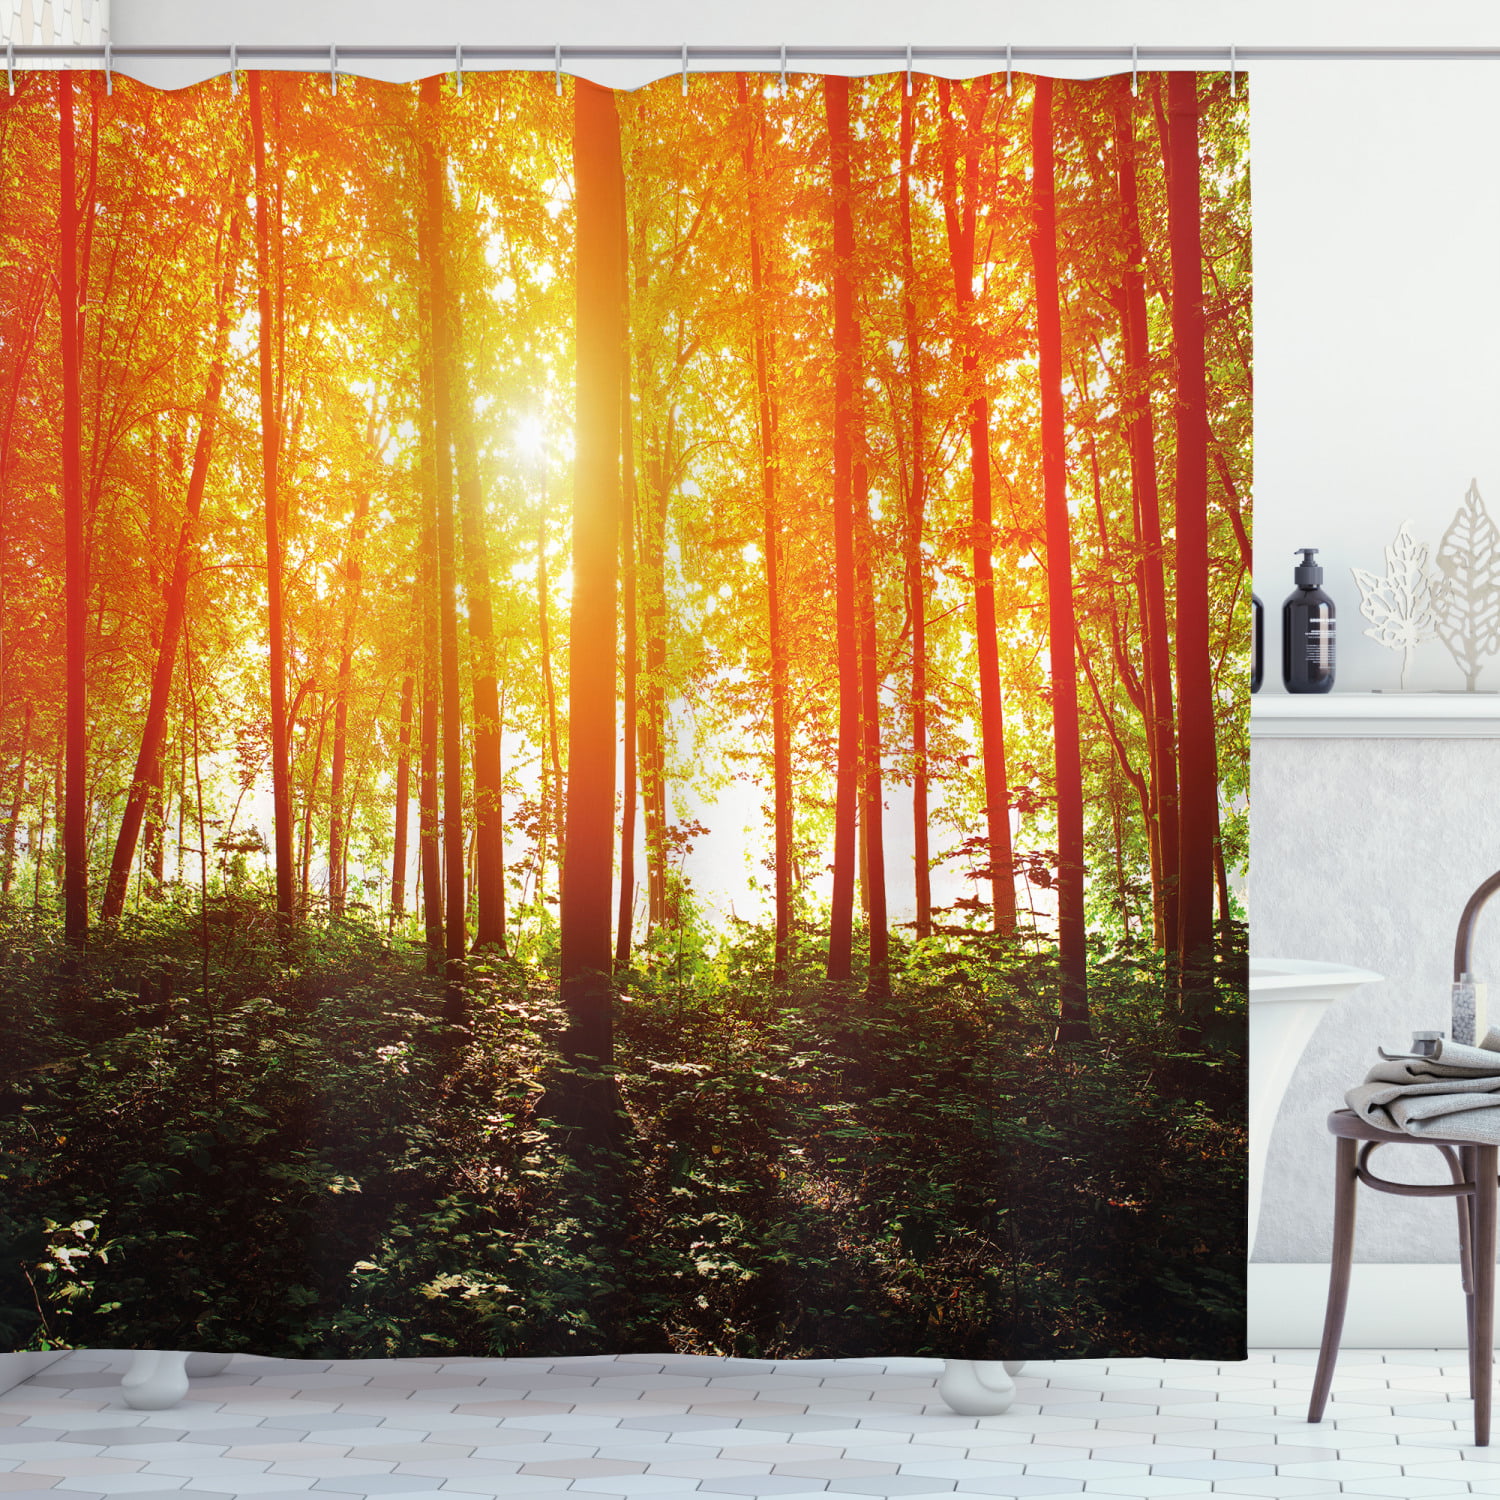 Autumn foggy Forest Landscape Shower Curtain Liner Polyester Waterproof Fabric 